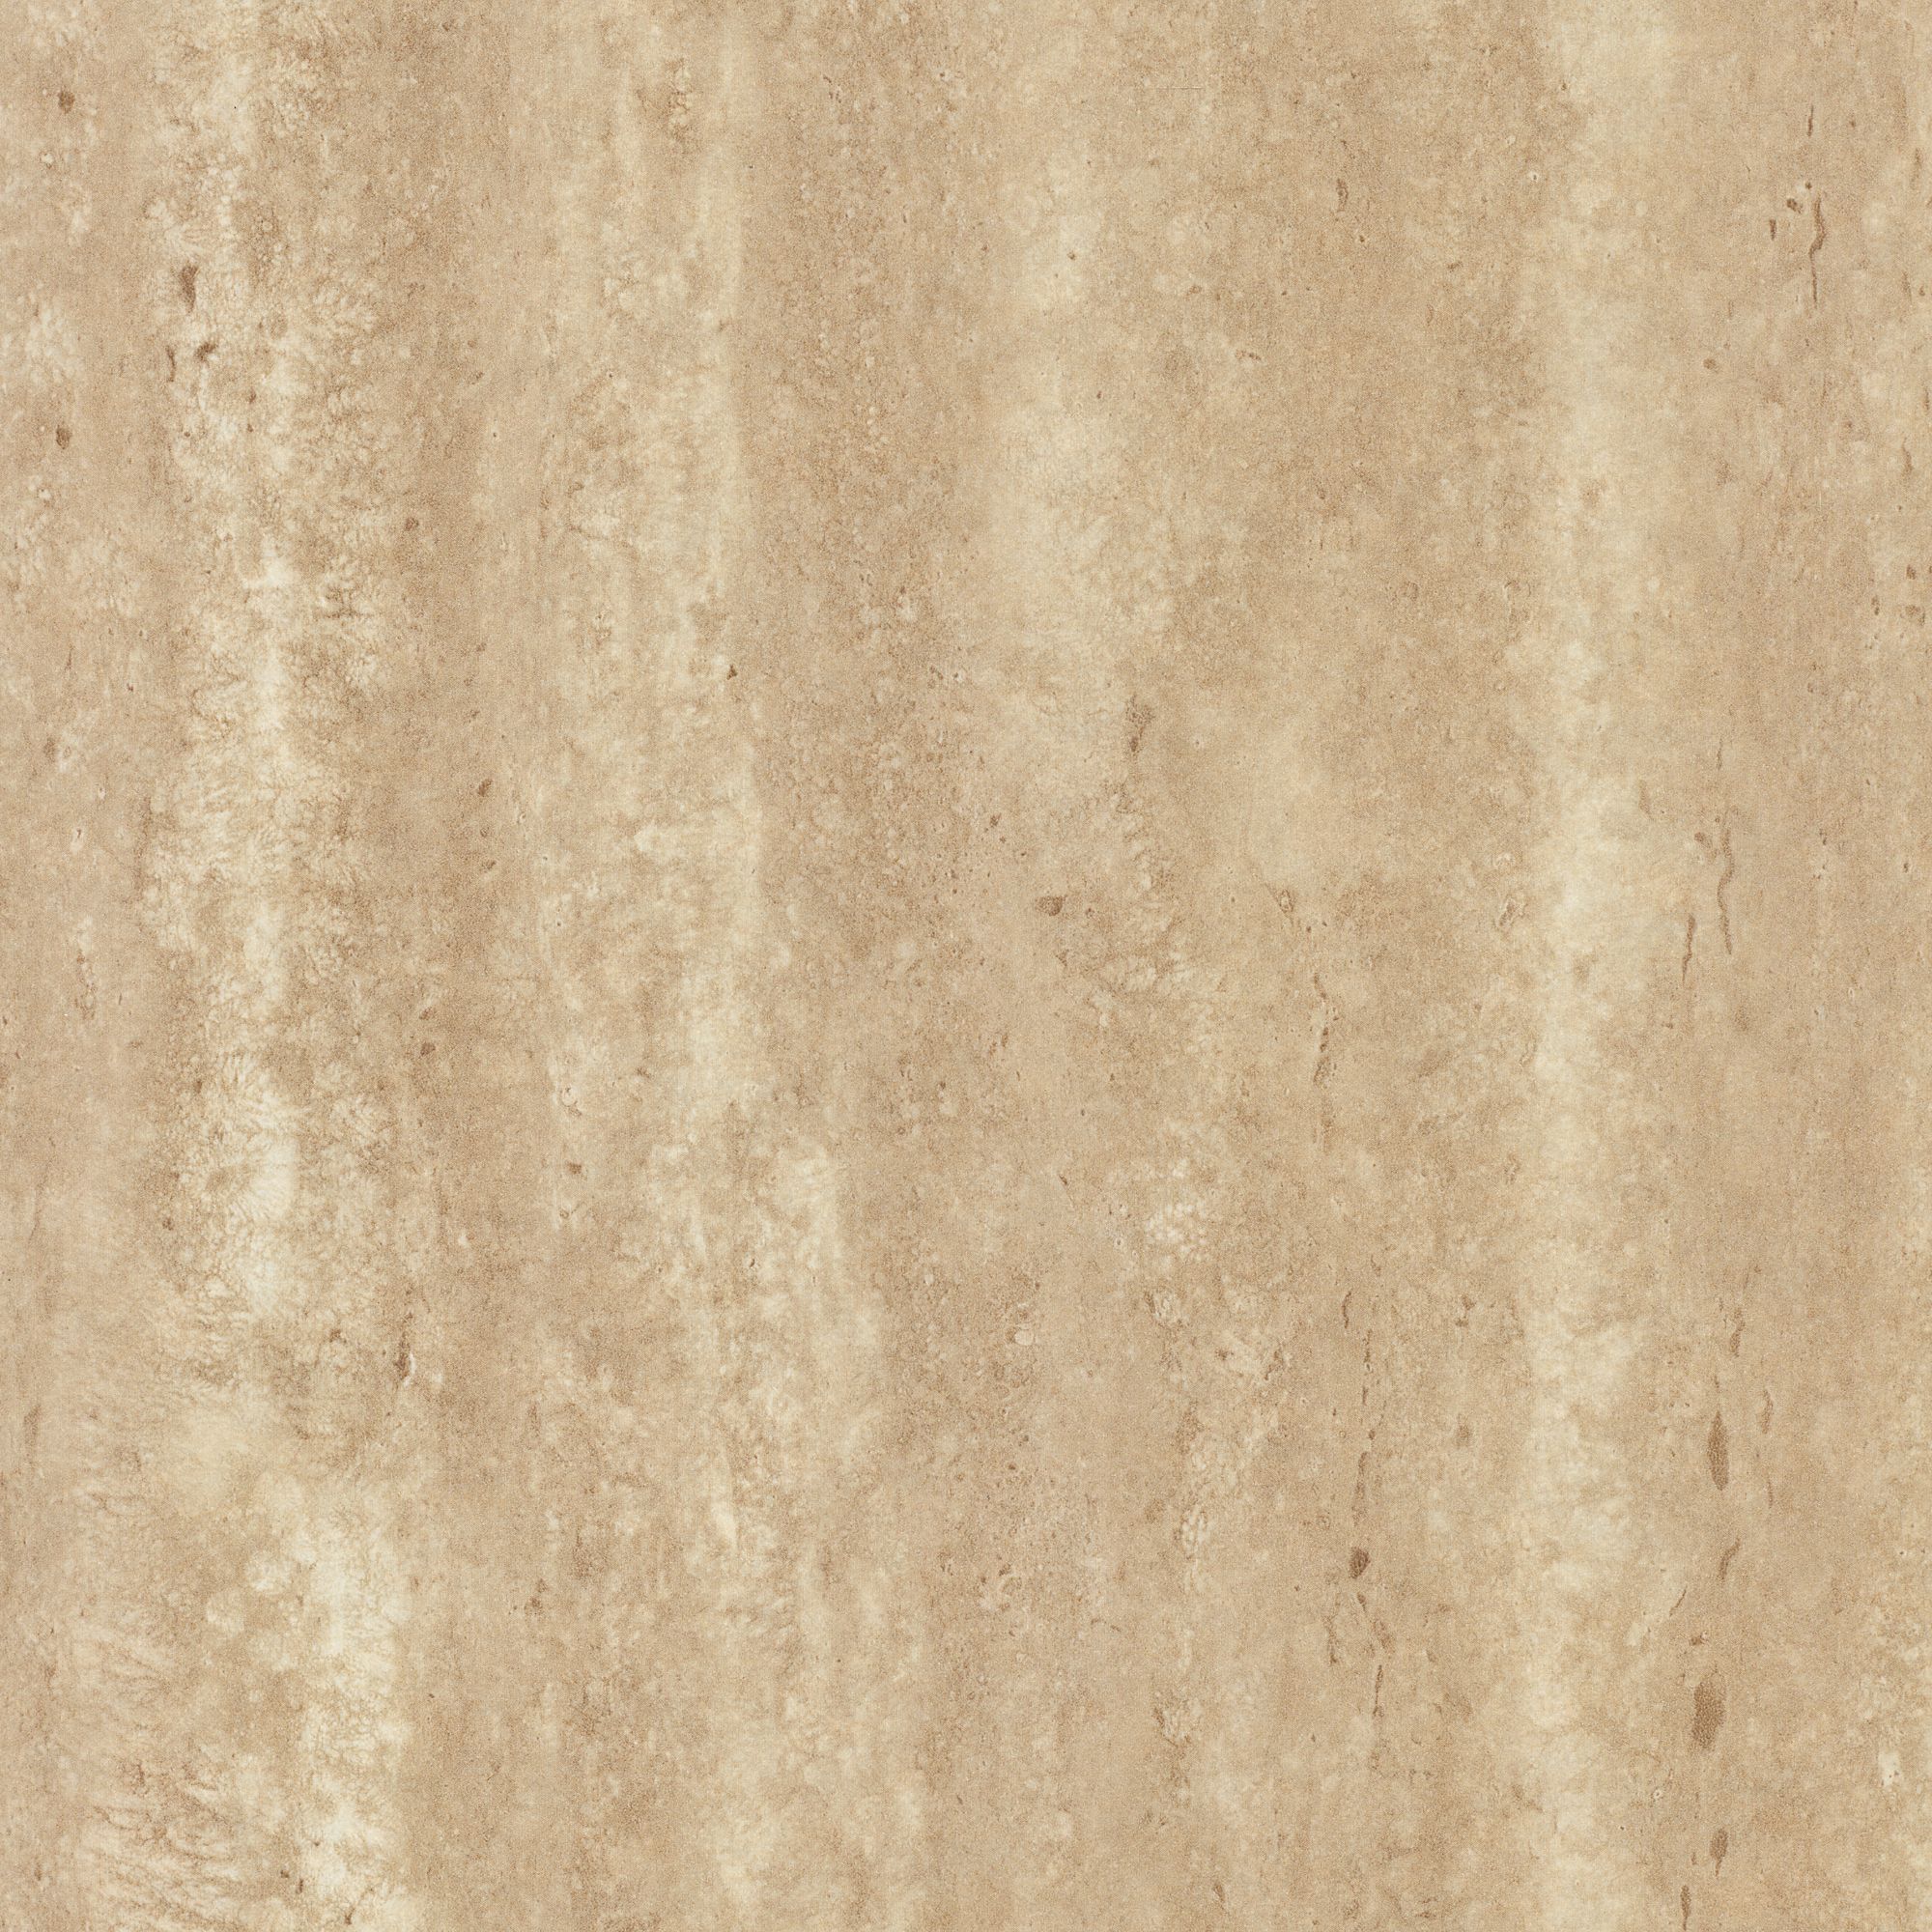 Splashwall Impressions Natural turin marble effect Panel, (H)2420mm (W)585mm